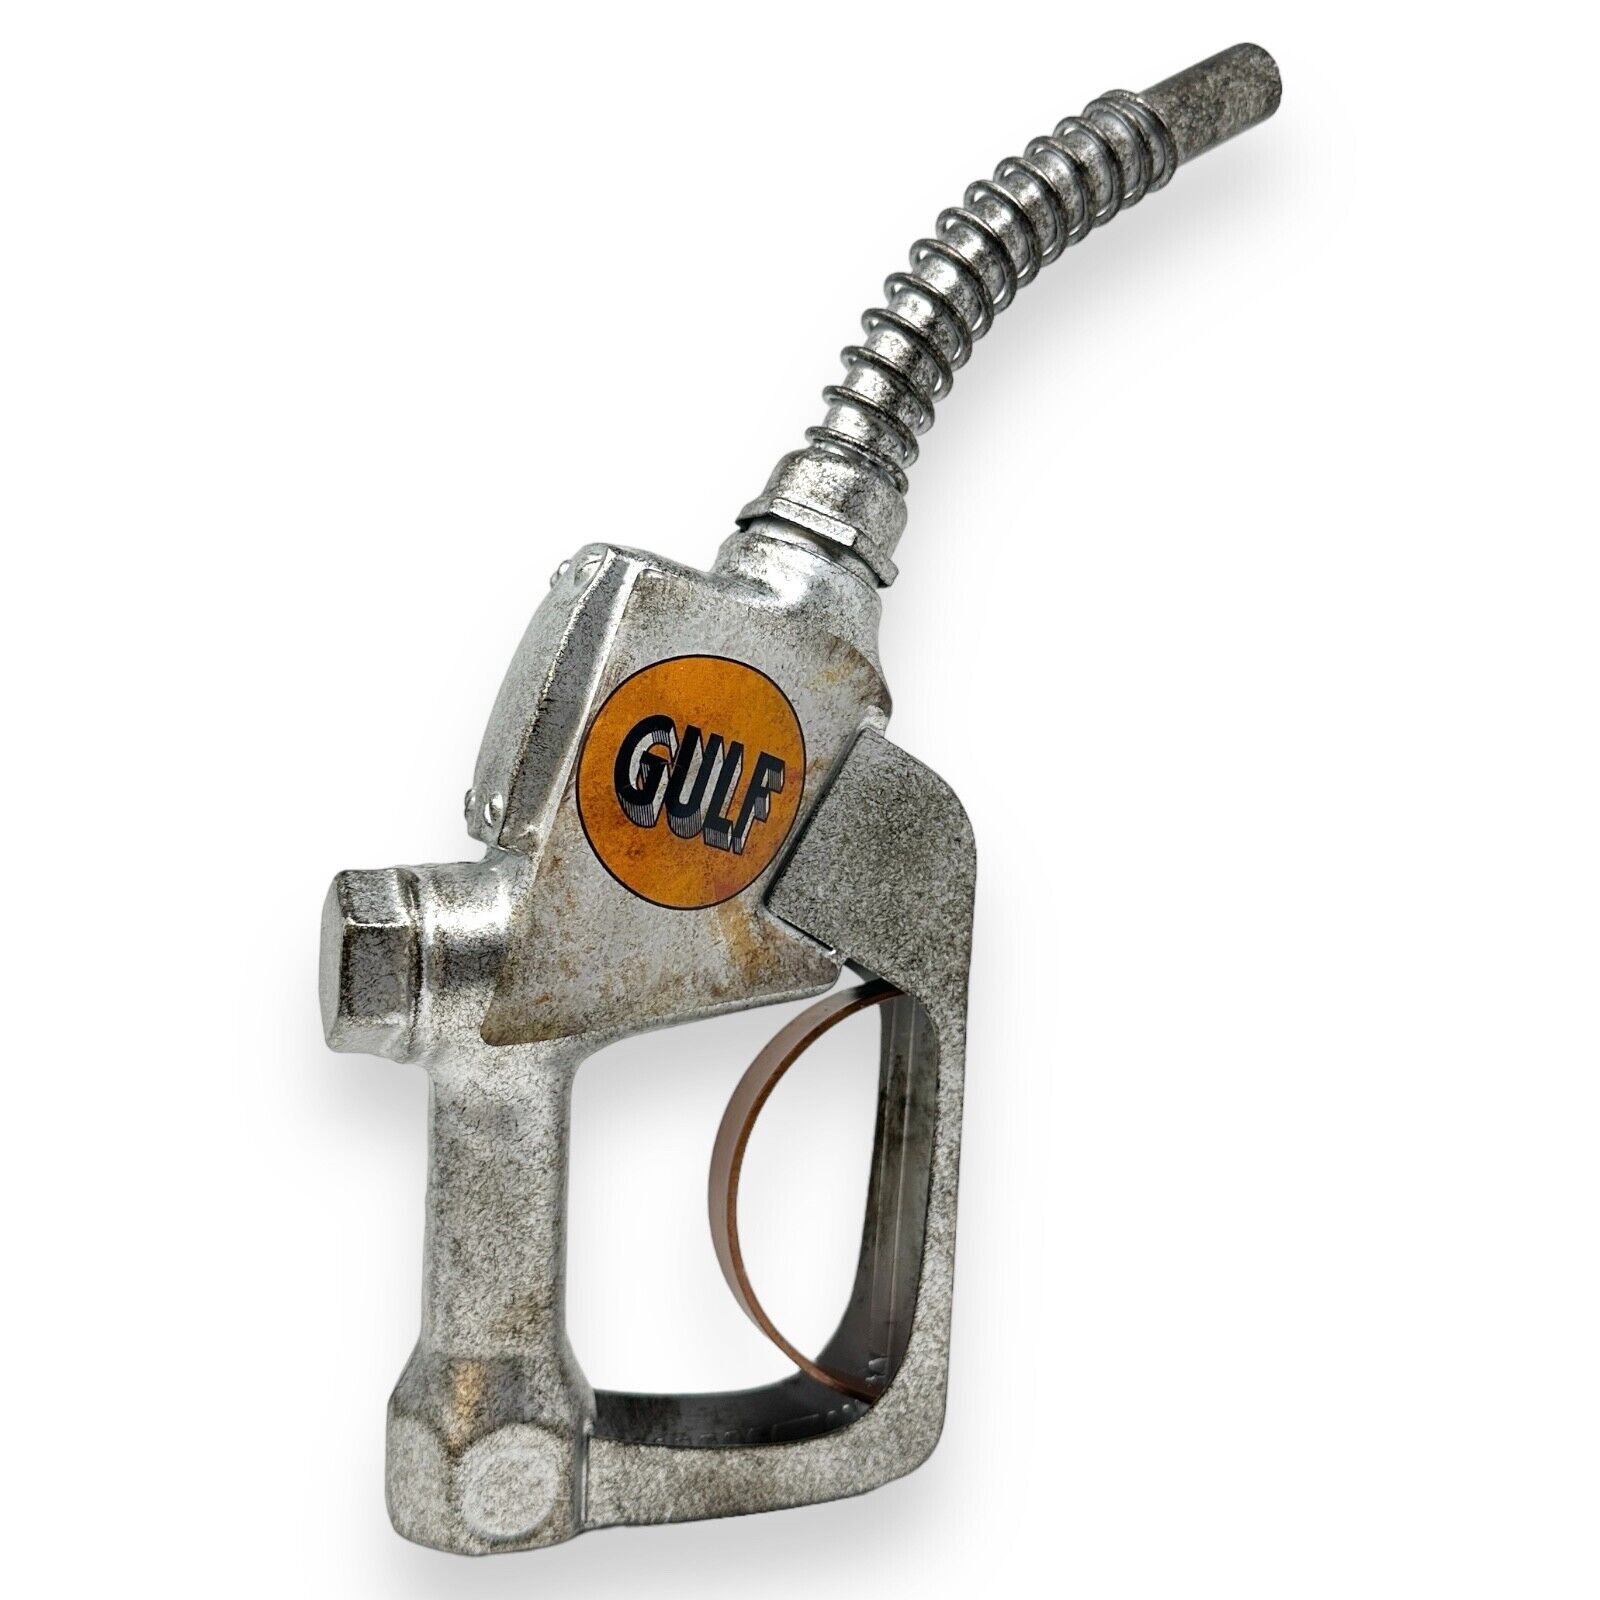 Gulf Oil Gas Pump Nozzle Wall Decor With Vintage Inspired Design